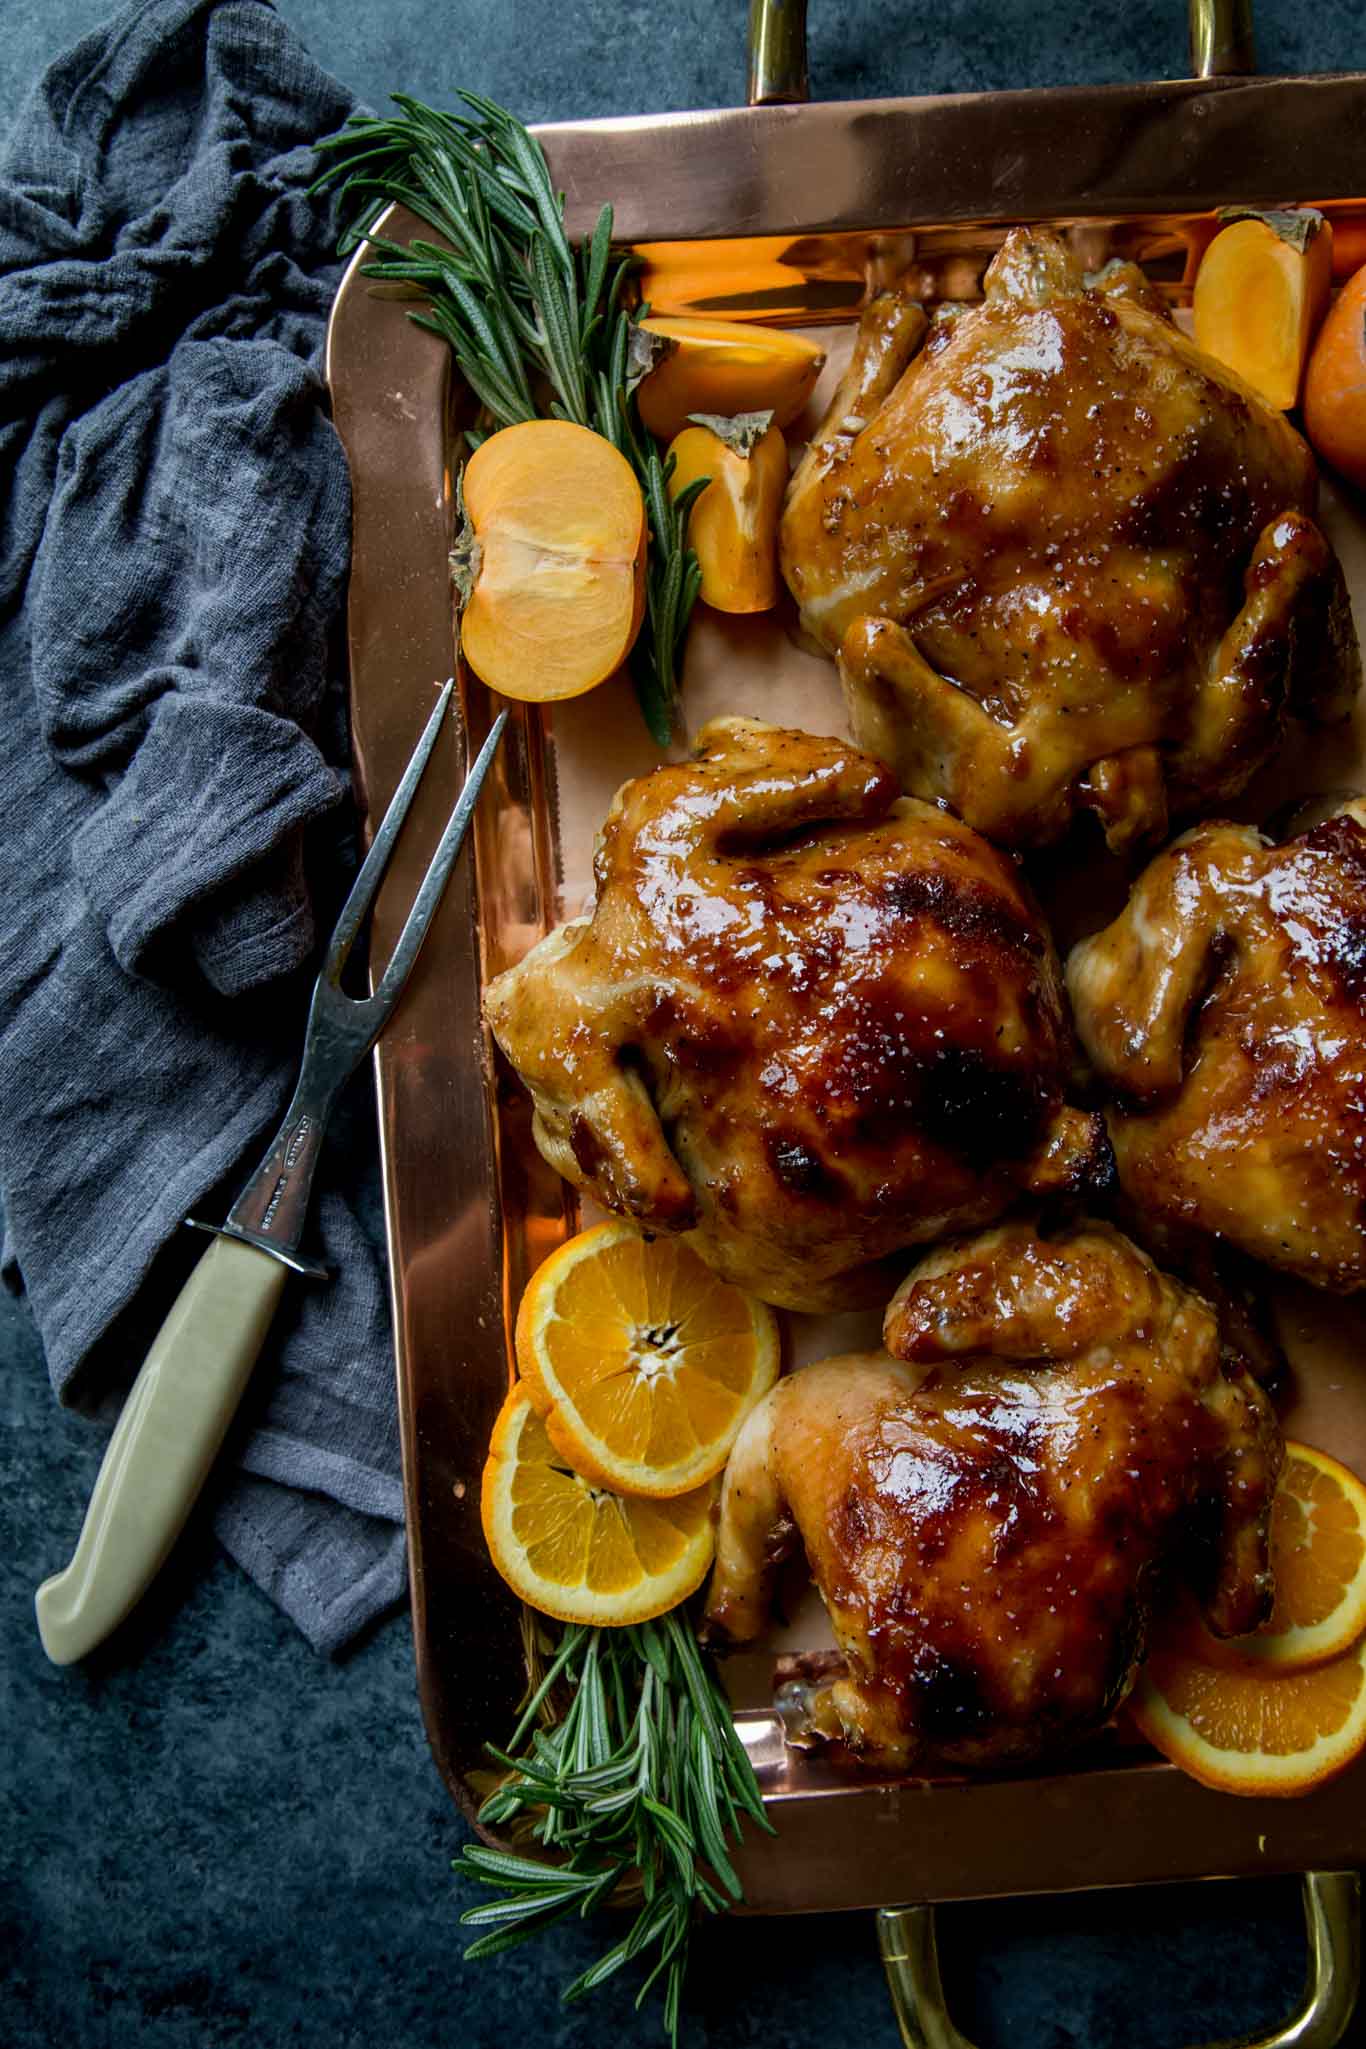 Cornish Game Hens with Apricot Glaze arranged on a platter.